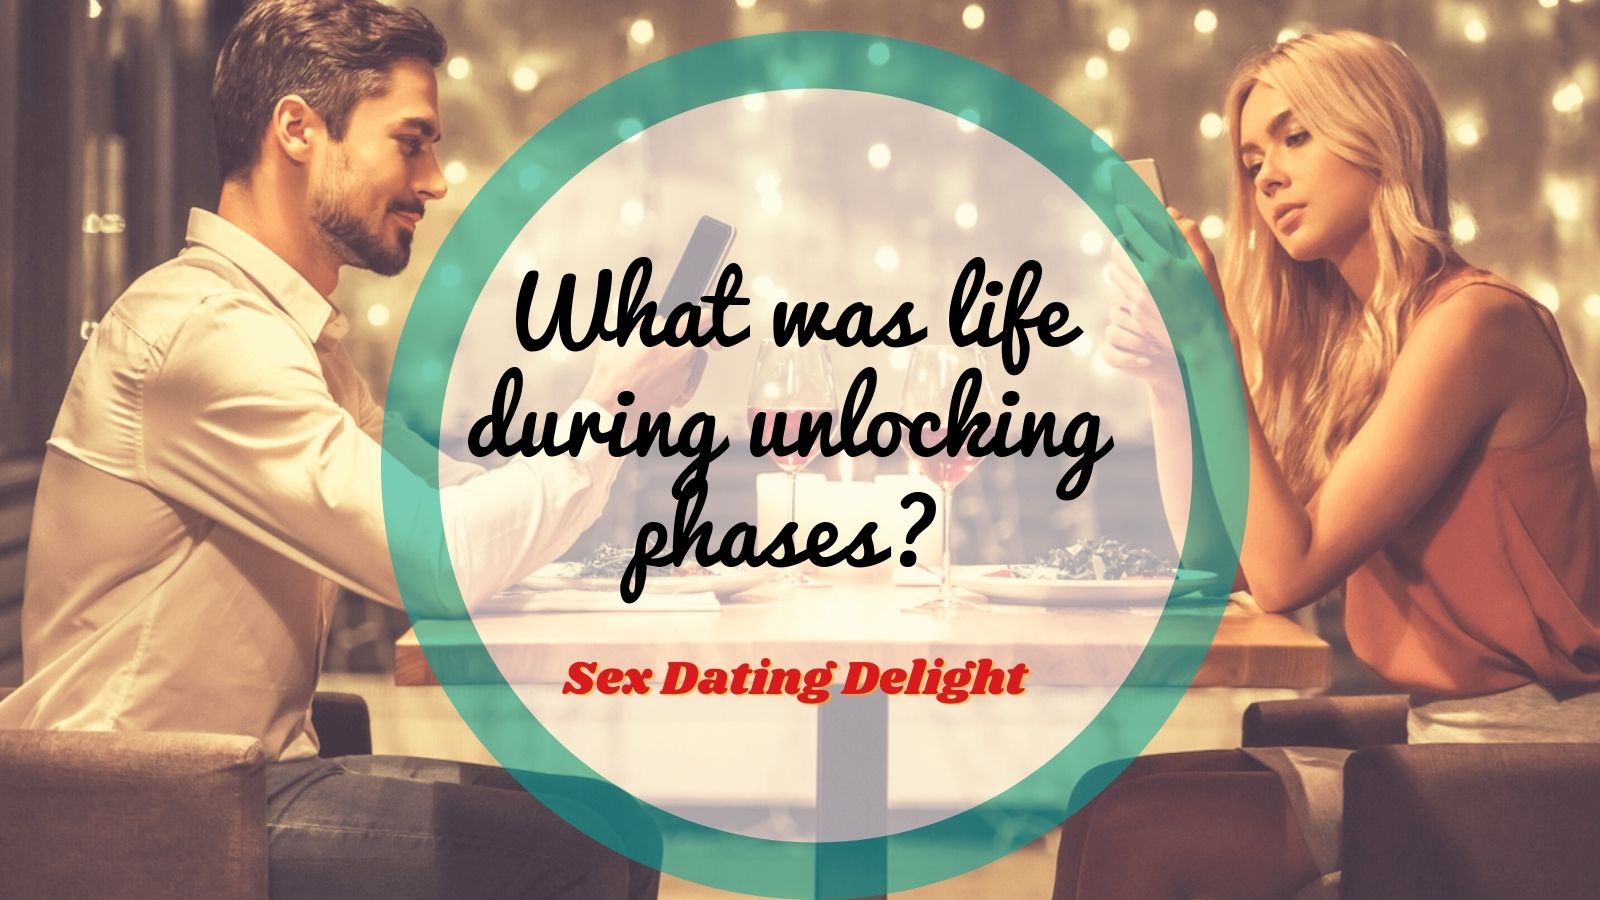 What was life during unlocking phases?